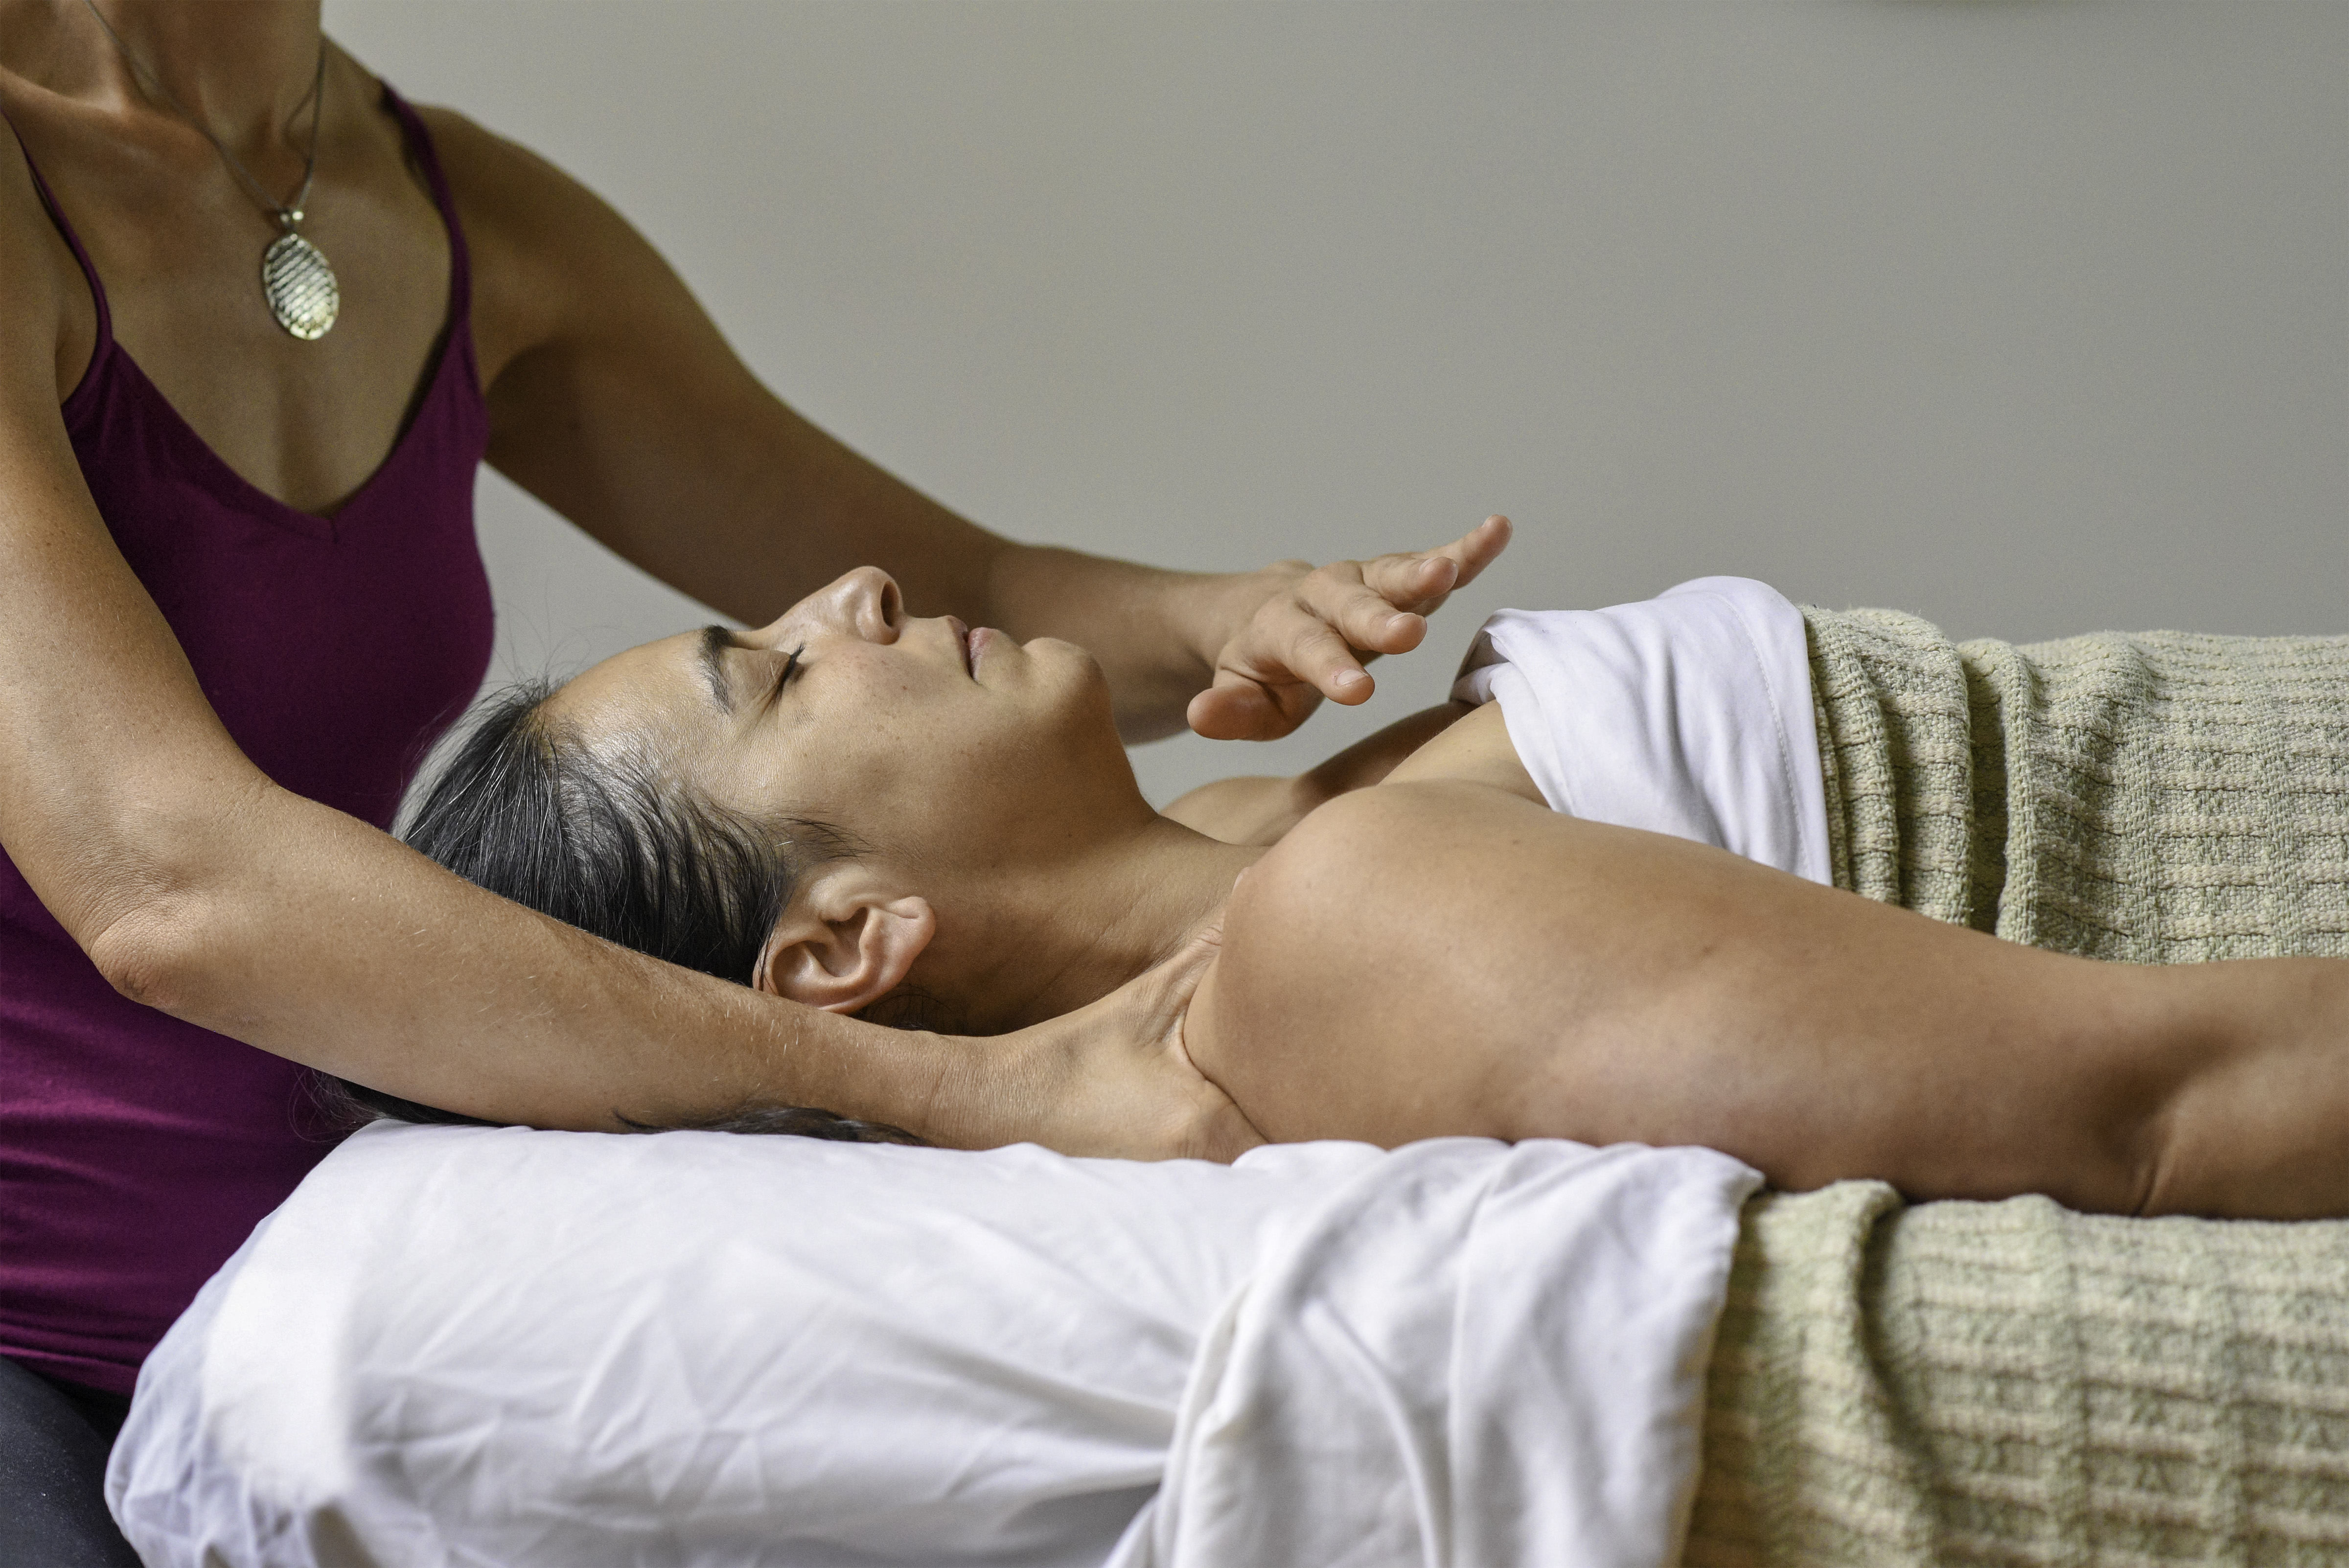 Your Reiki Questions Answered